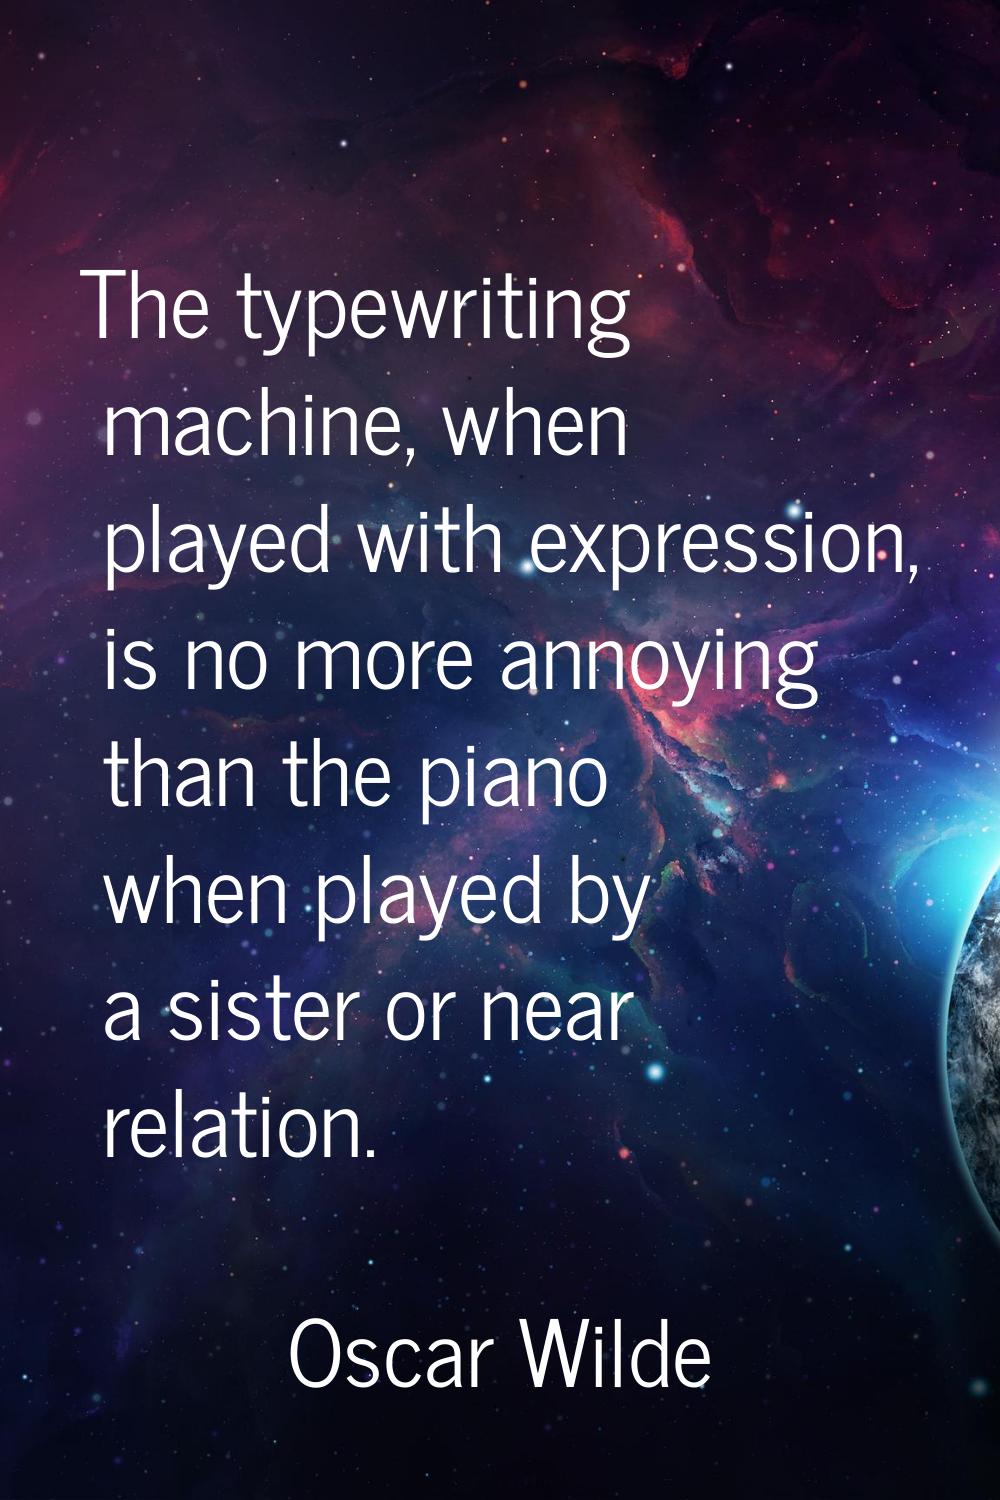 The typewriting machine, when played with expression, is no more annoying than the piano when playe